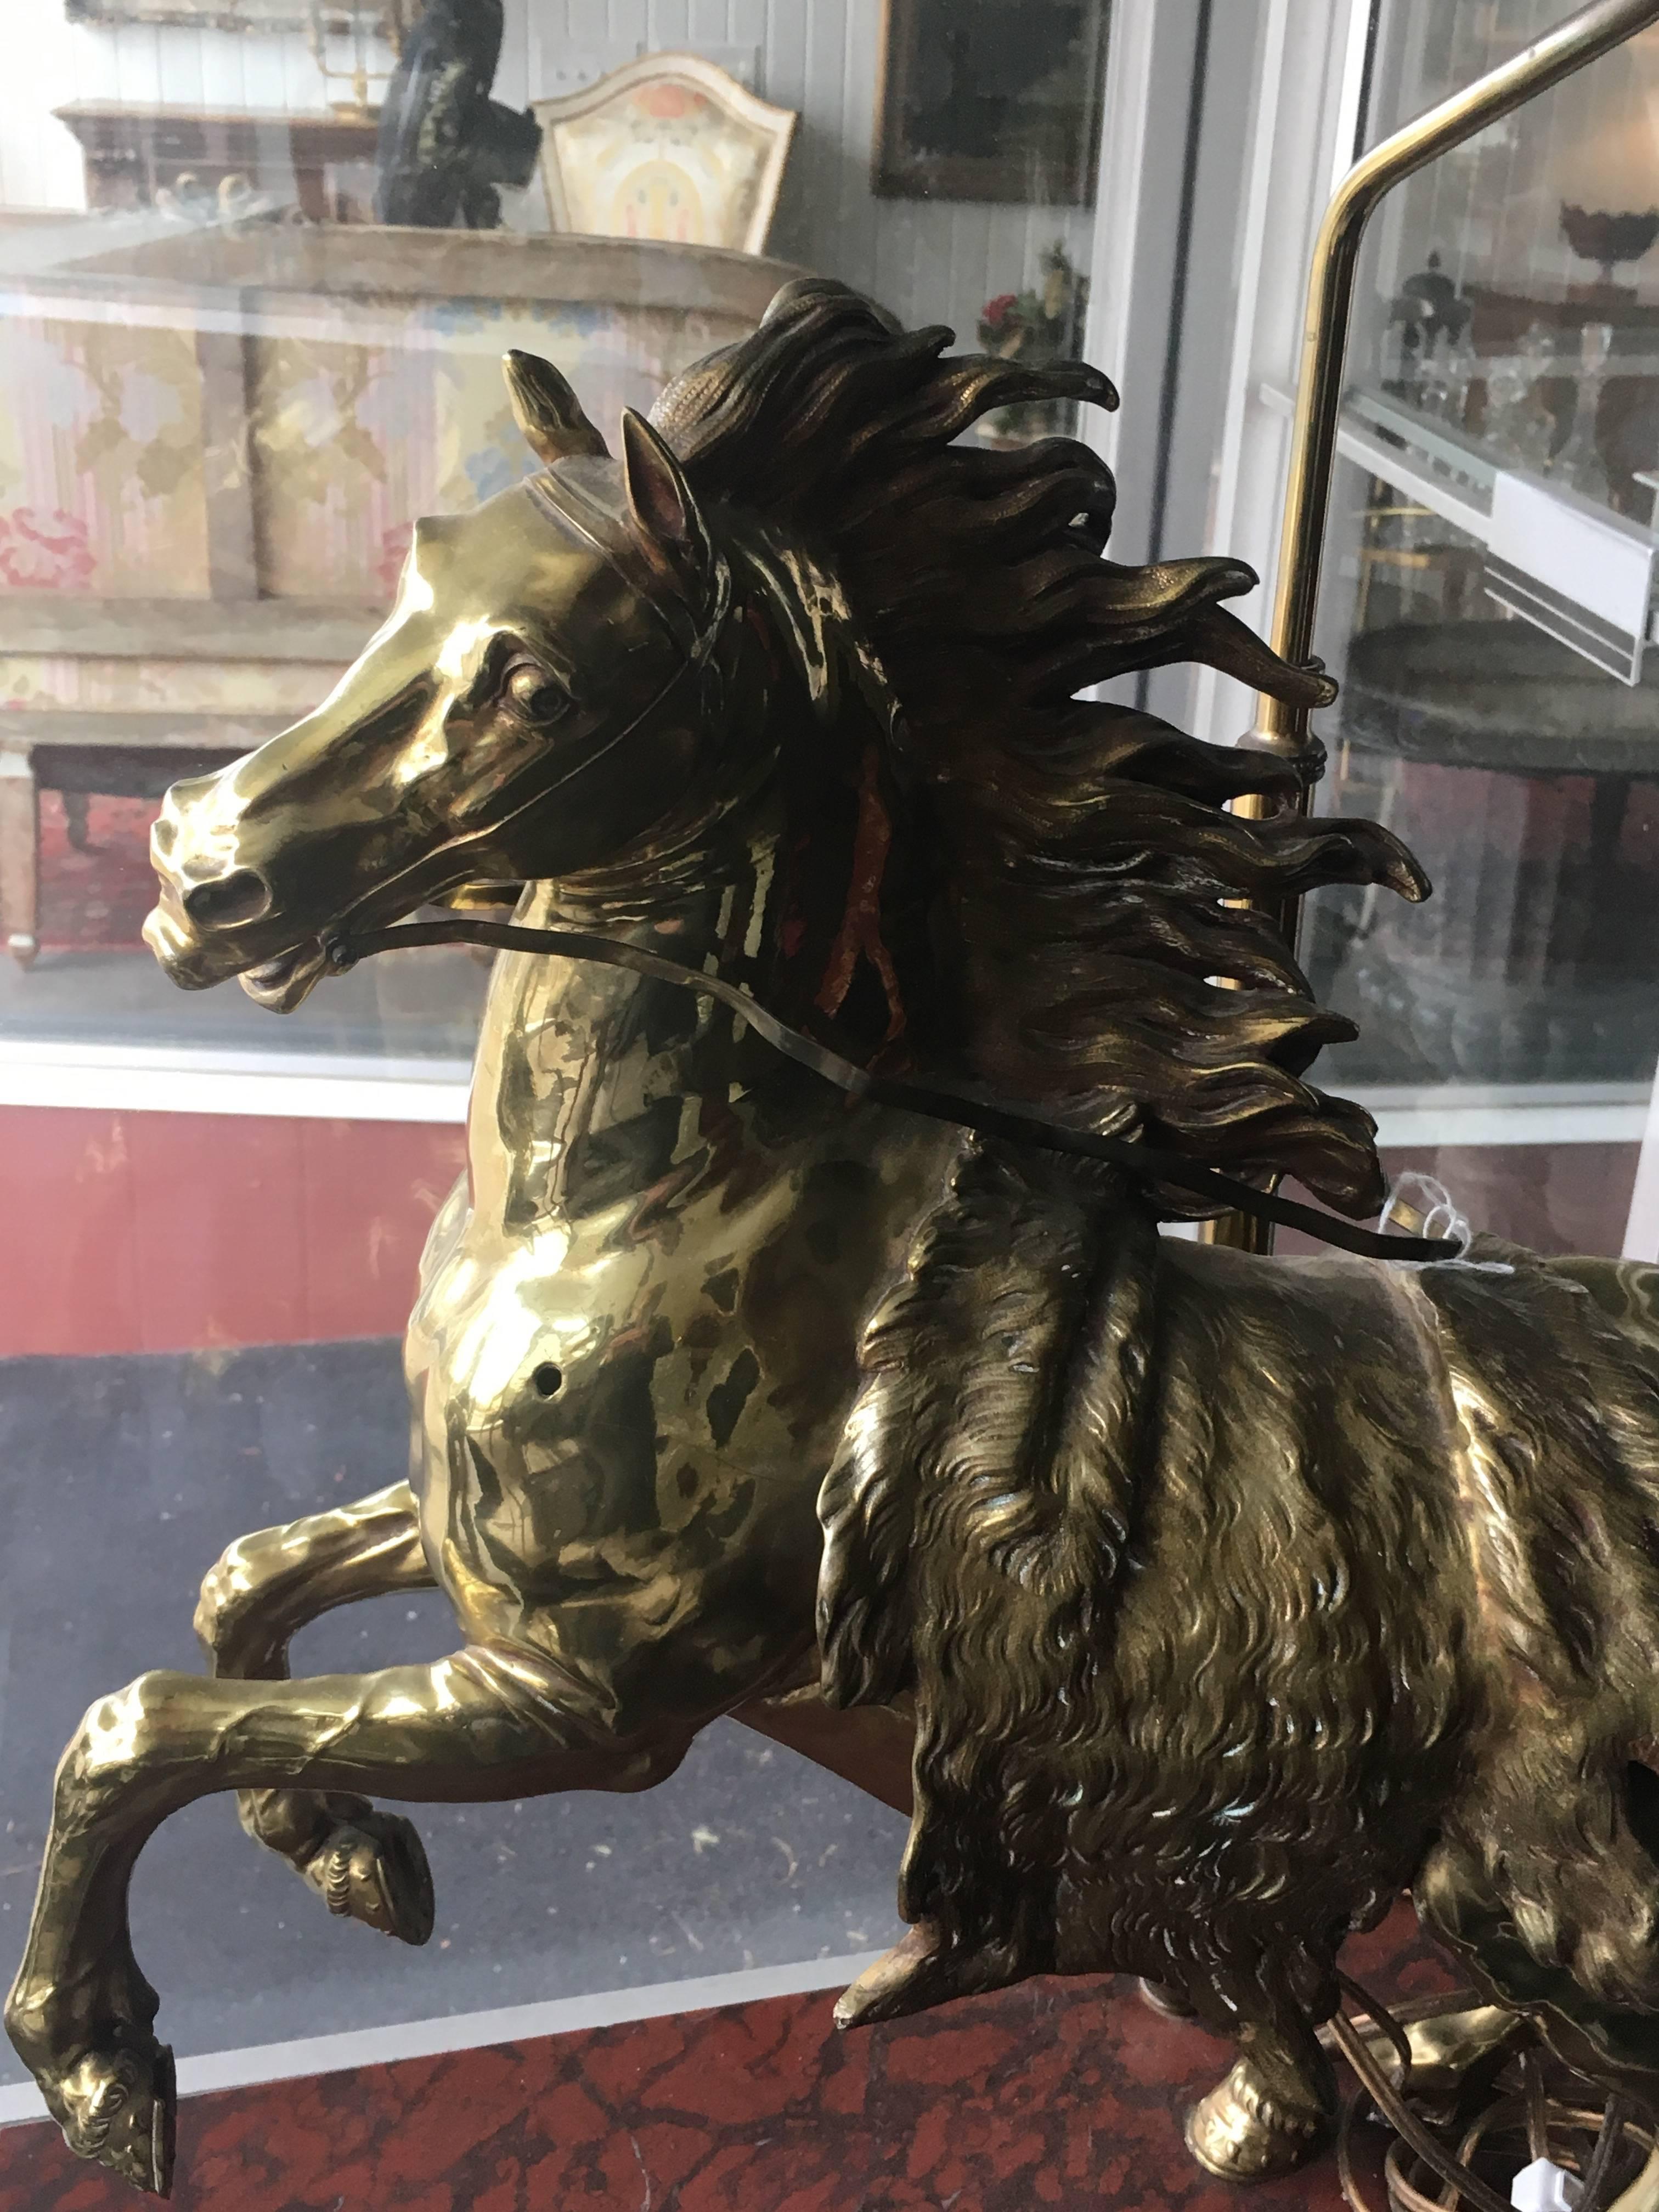 A pair of gilt bronze horses
each in the form of a galloping horse, raised on a faux marble rectangular plinth with rounded corners and mounted as lamps.
Measures: Height overall 28 inches.